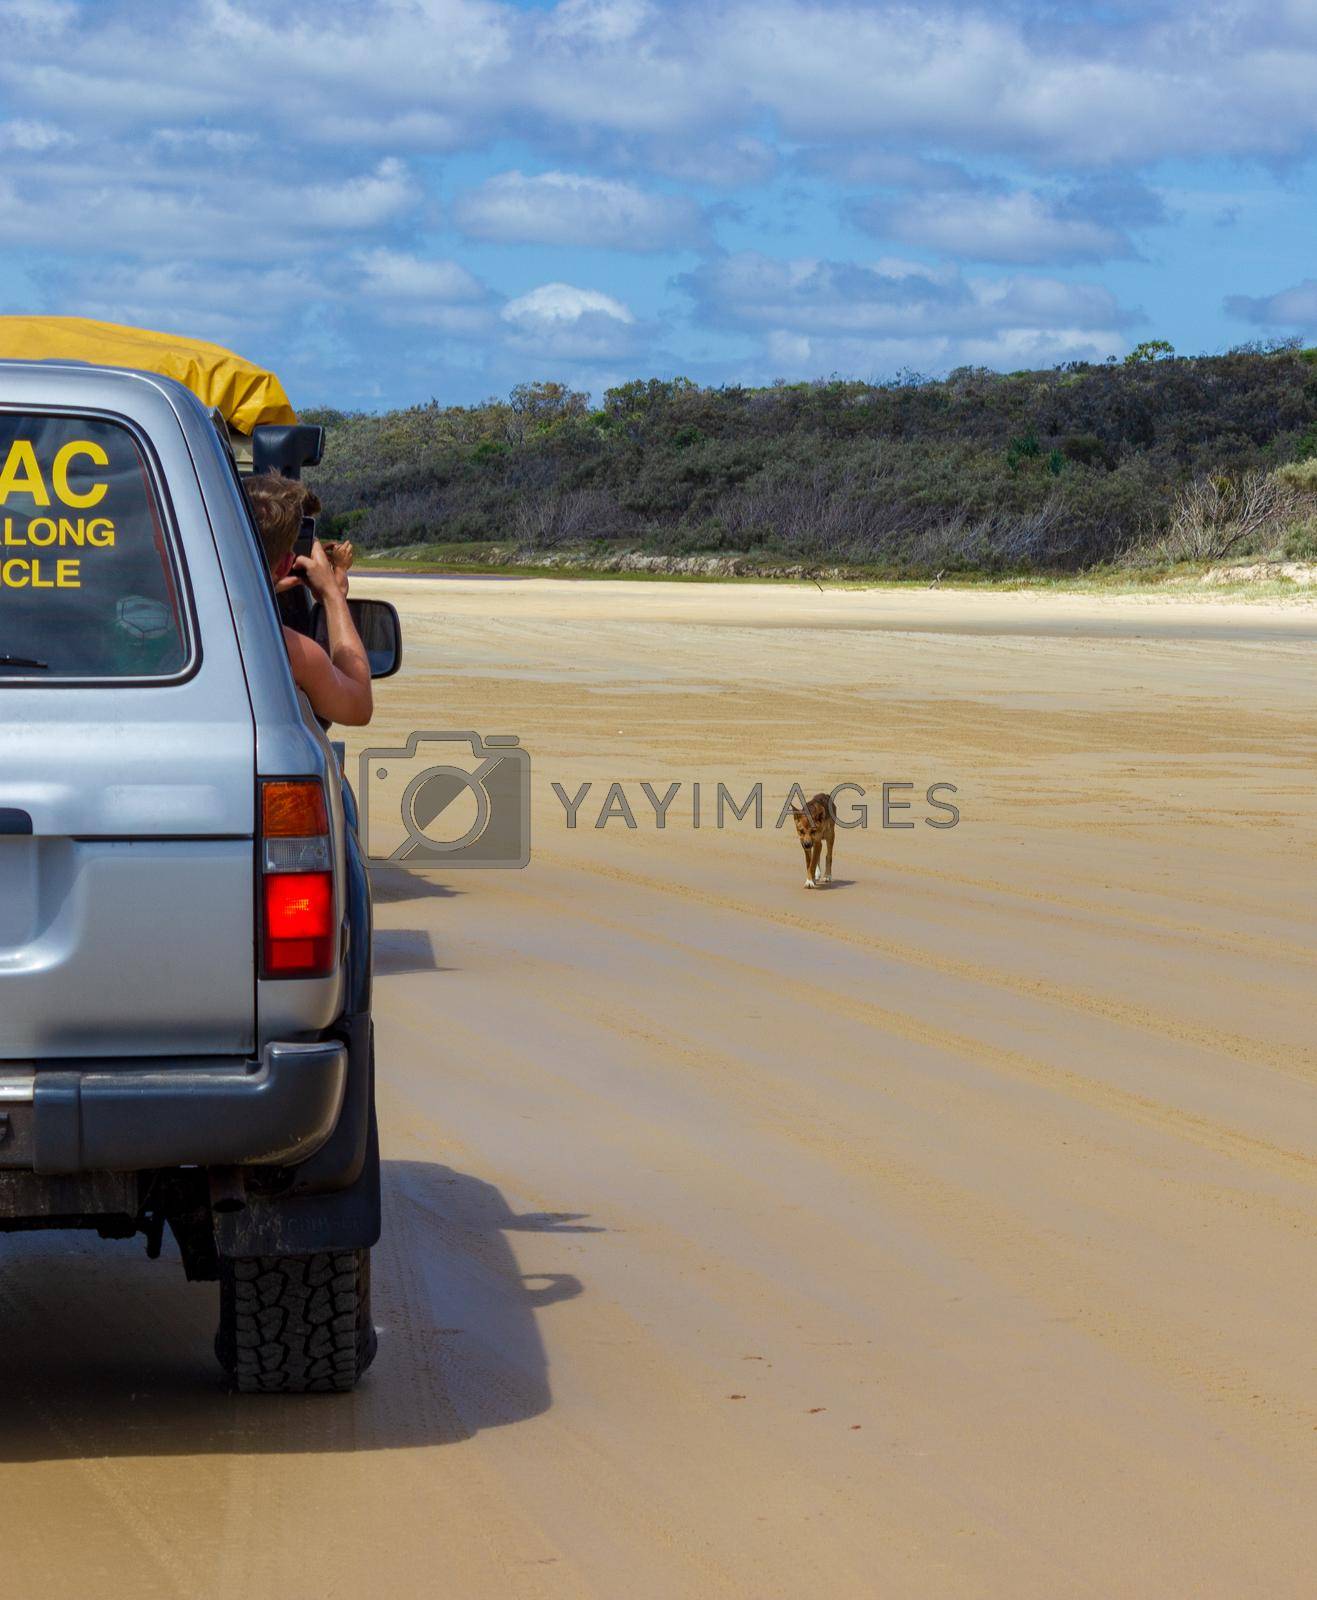 Royalty free image of trourist taking pictures of a Dingo out of the car, on the beach in Great Sandy National Park, Fraser Island Waddy Point, QLD, Australia by bettercallcurry